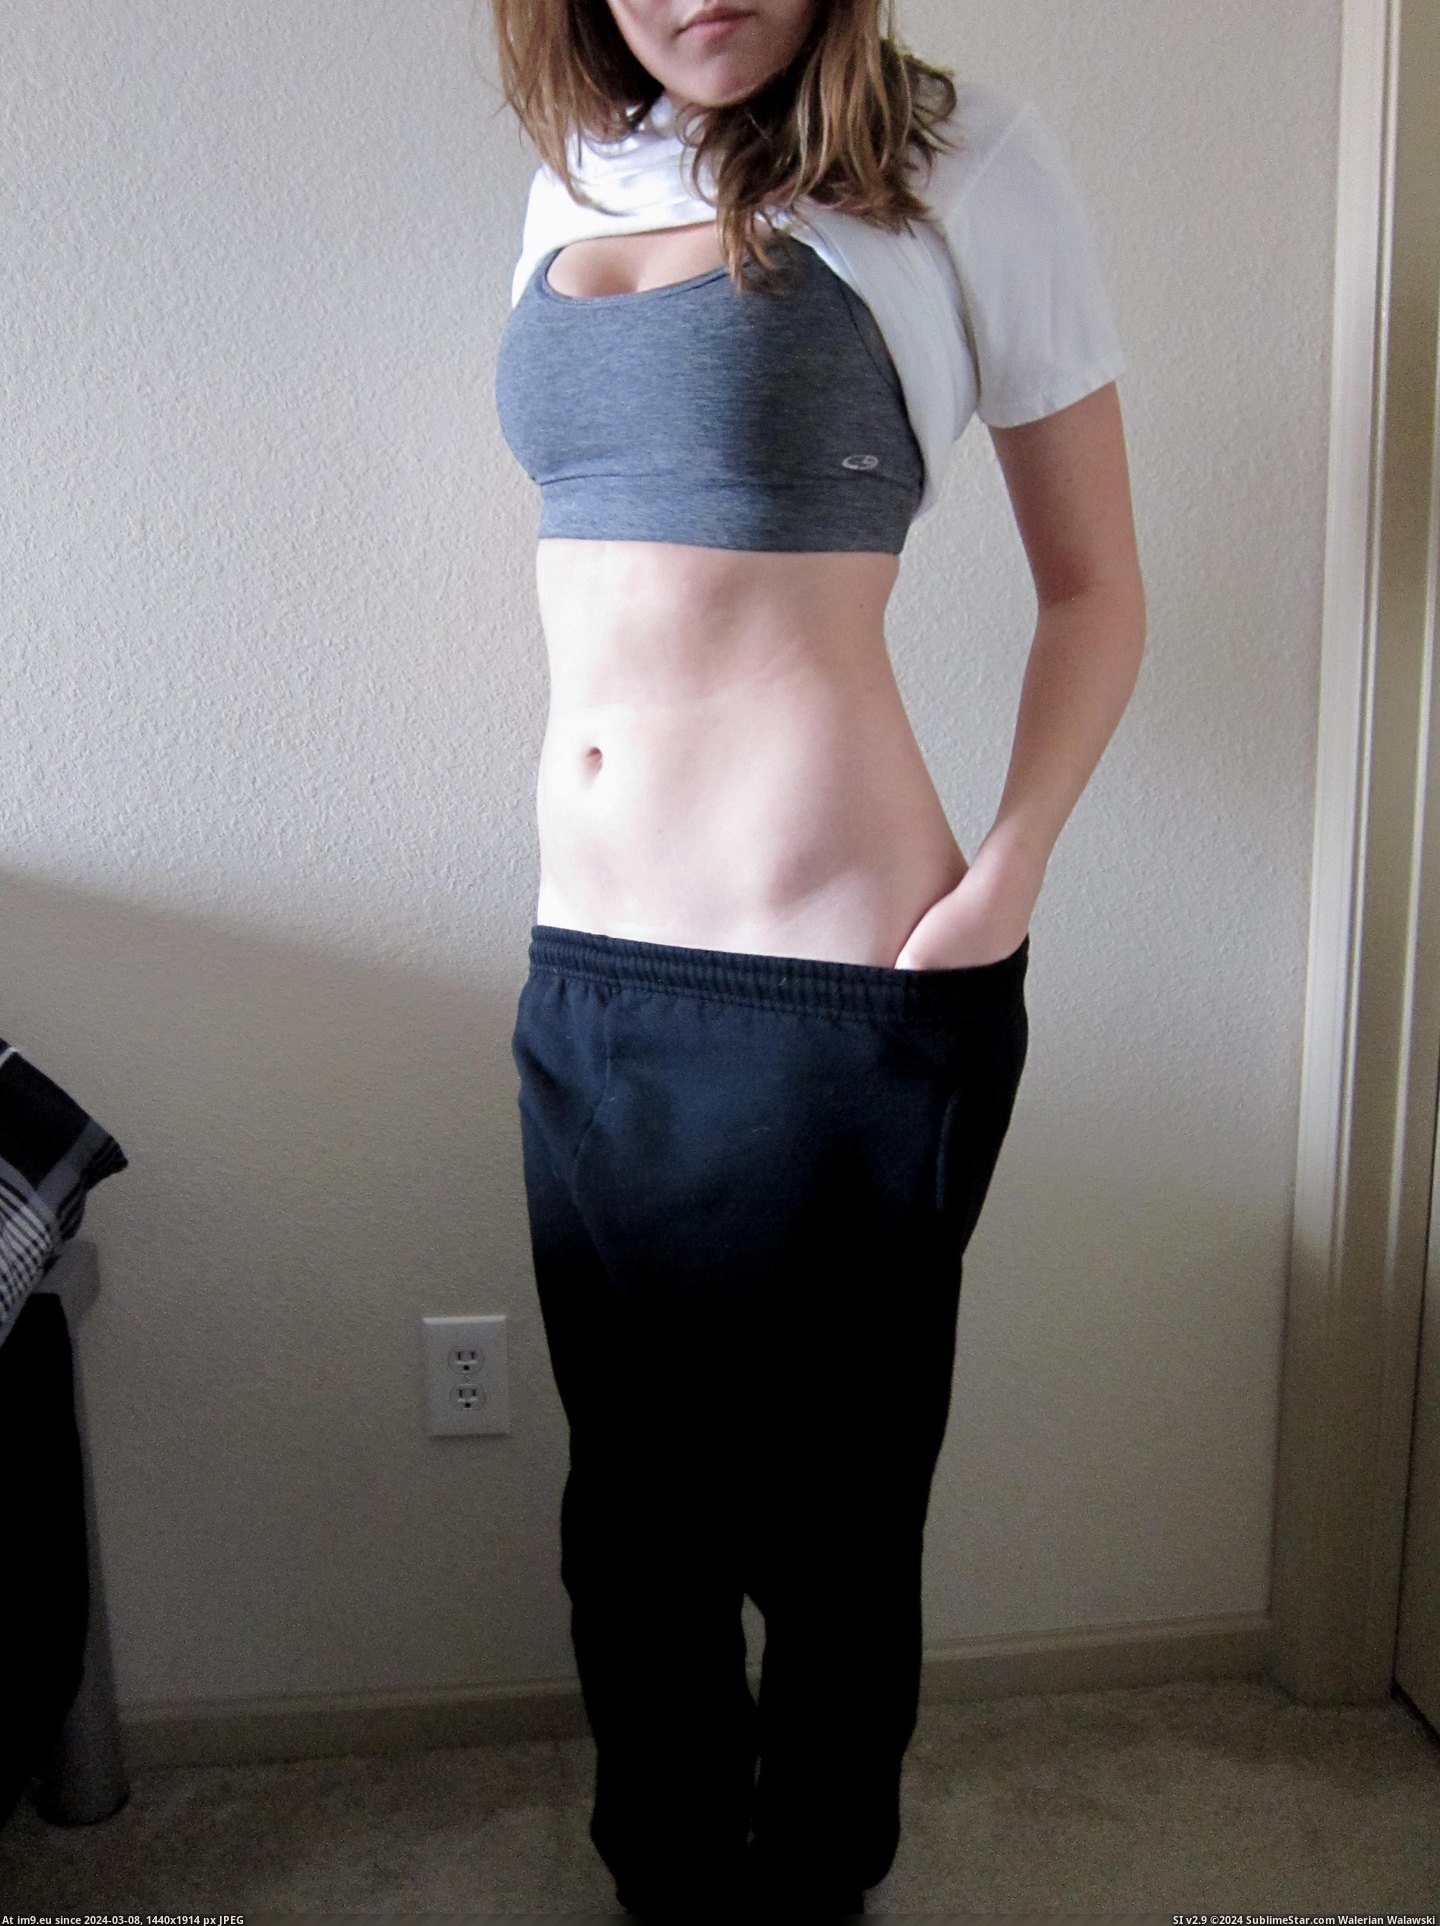 #Uck  #Sweatpants [Gonewild] [F]uck me in my sweatpants.... ;) 15 Pic. (Image of album My r/GONEWILD favs))